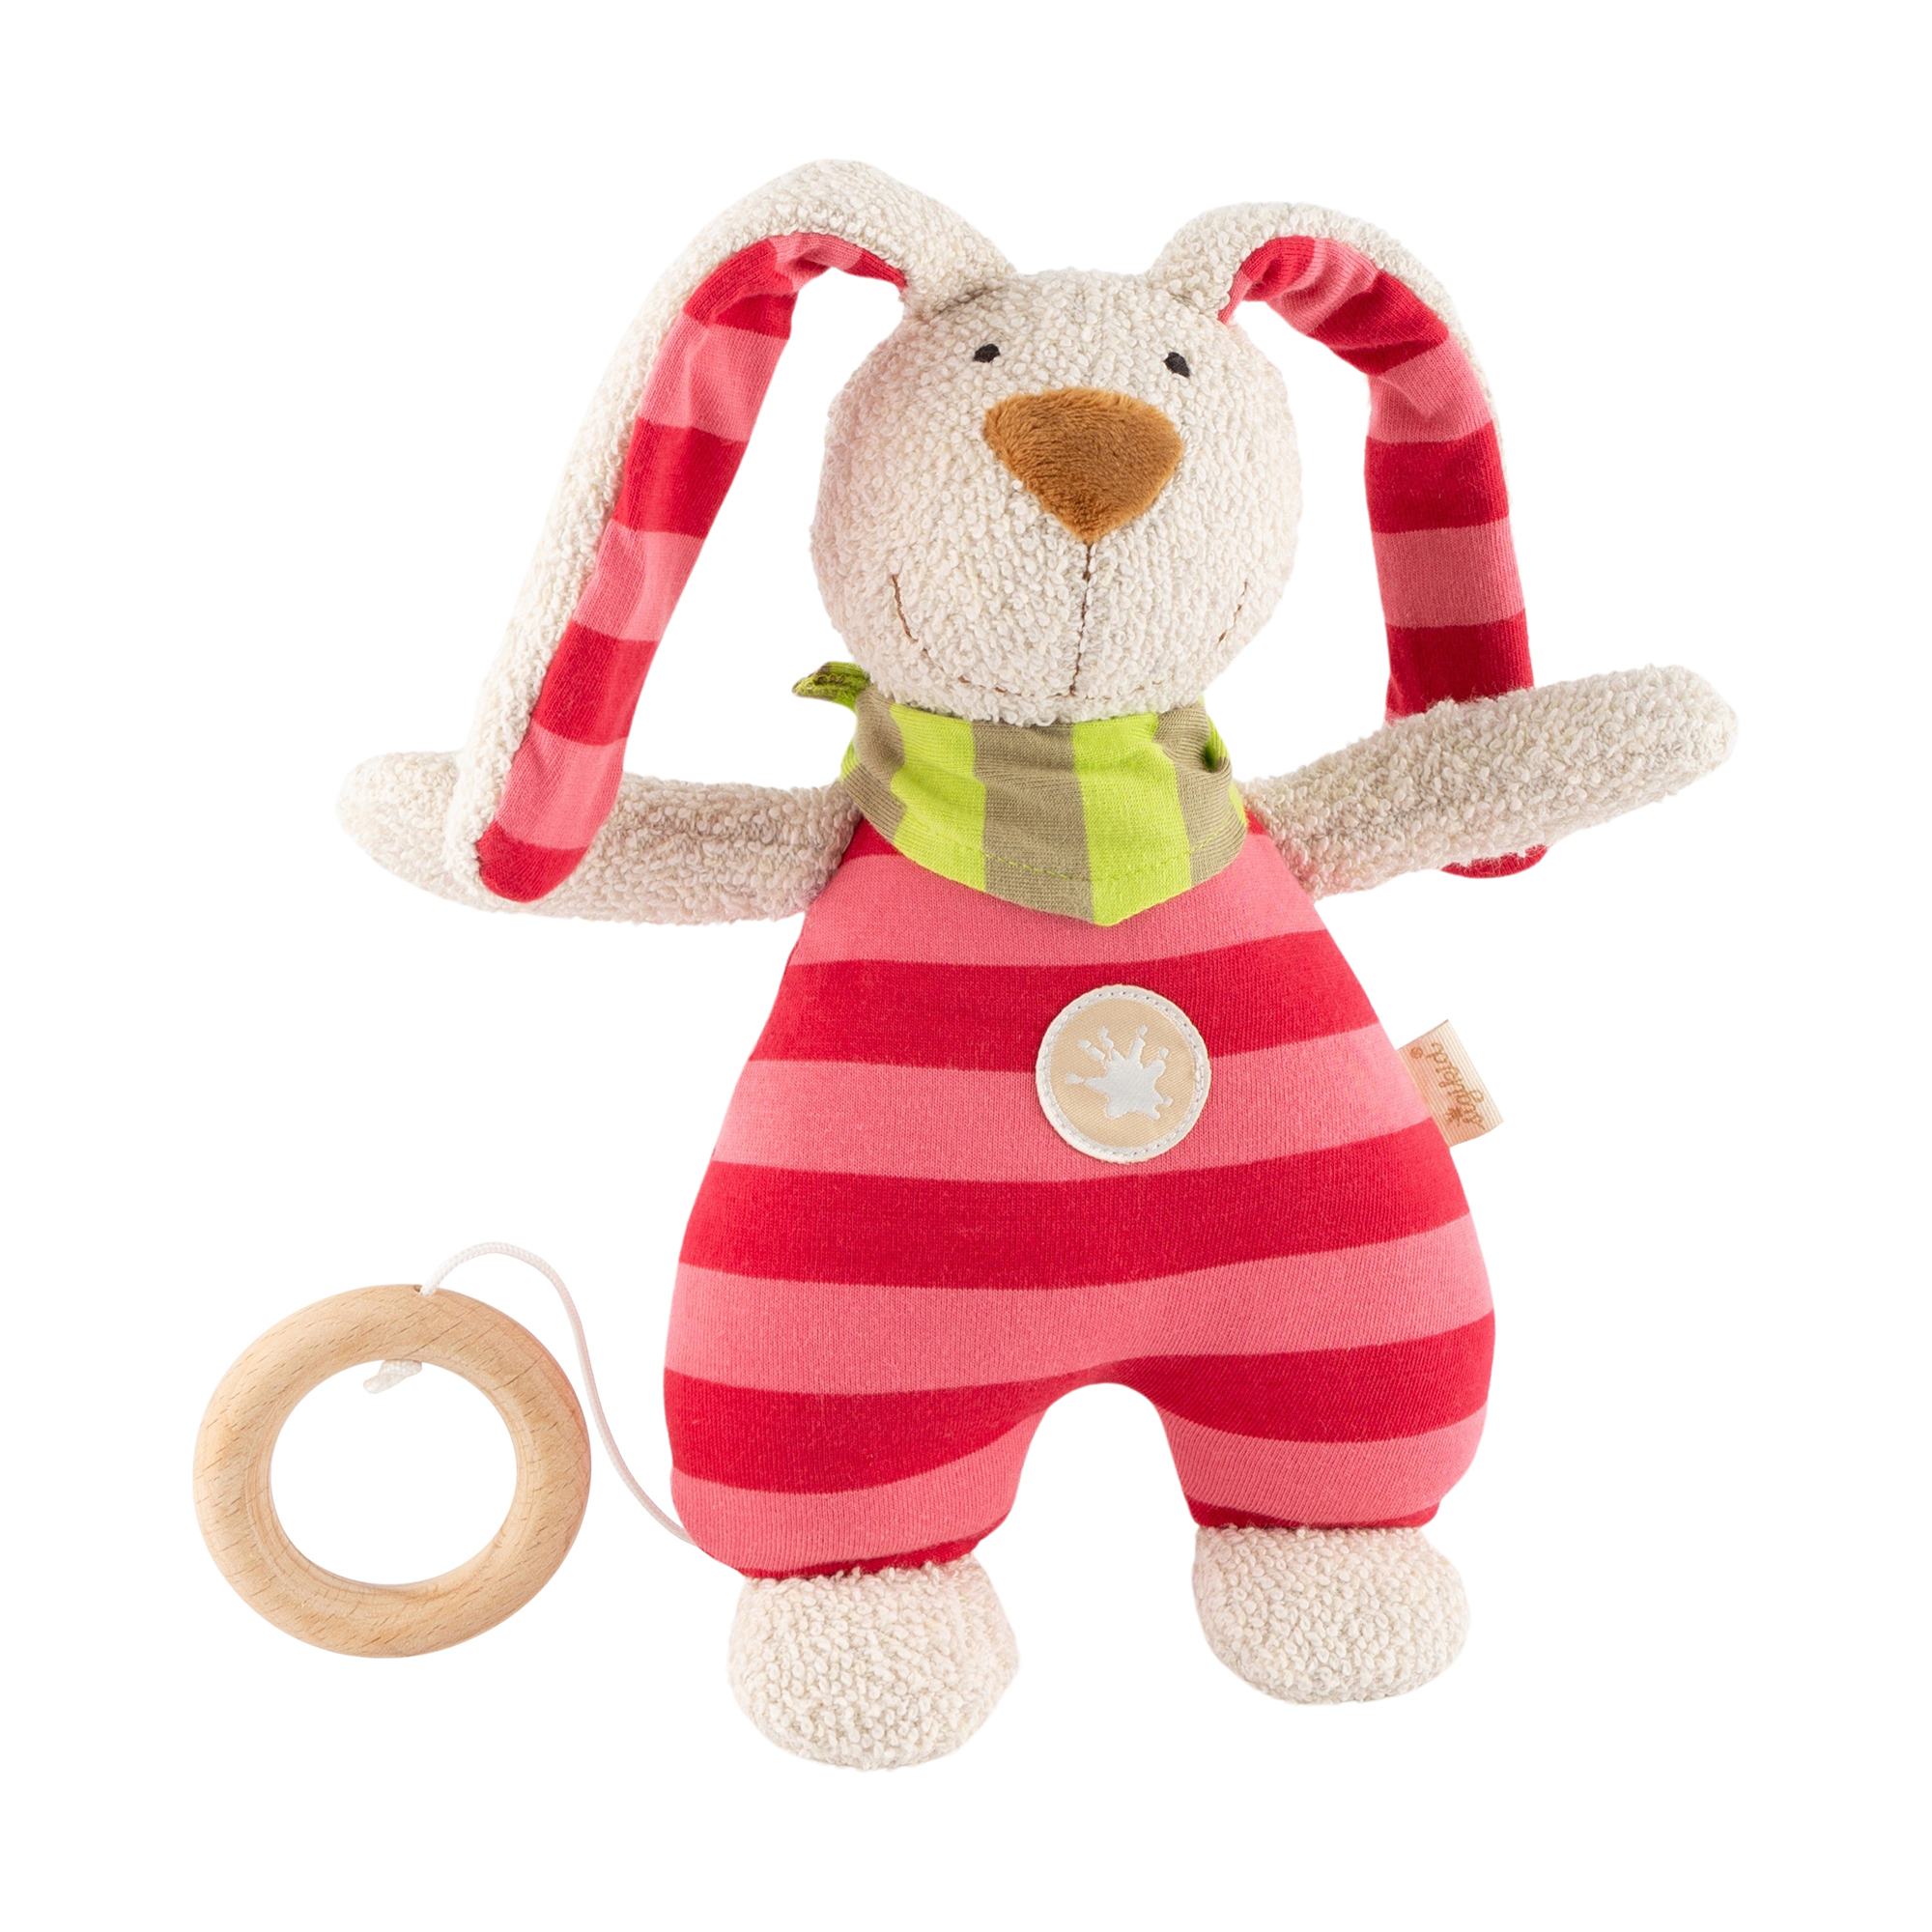 Musical soft toy bunny, cotton terry cloth